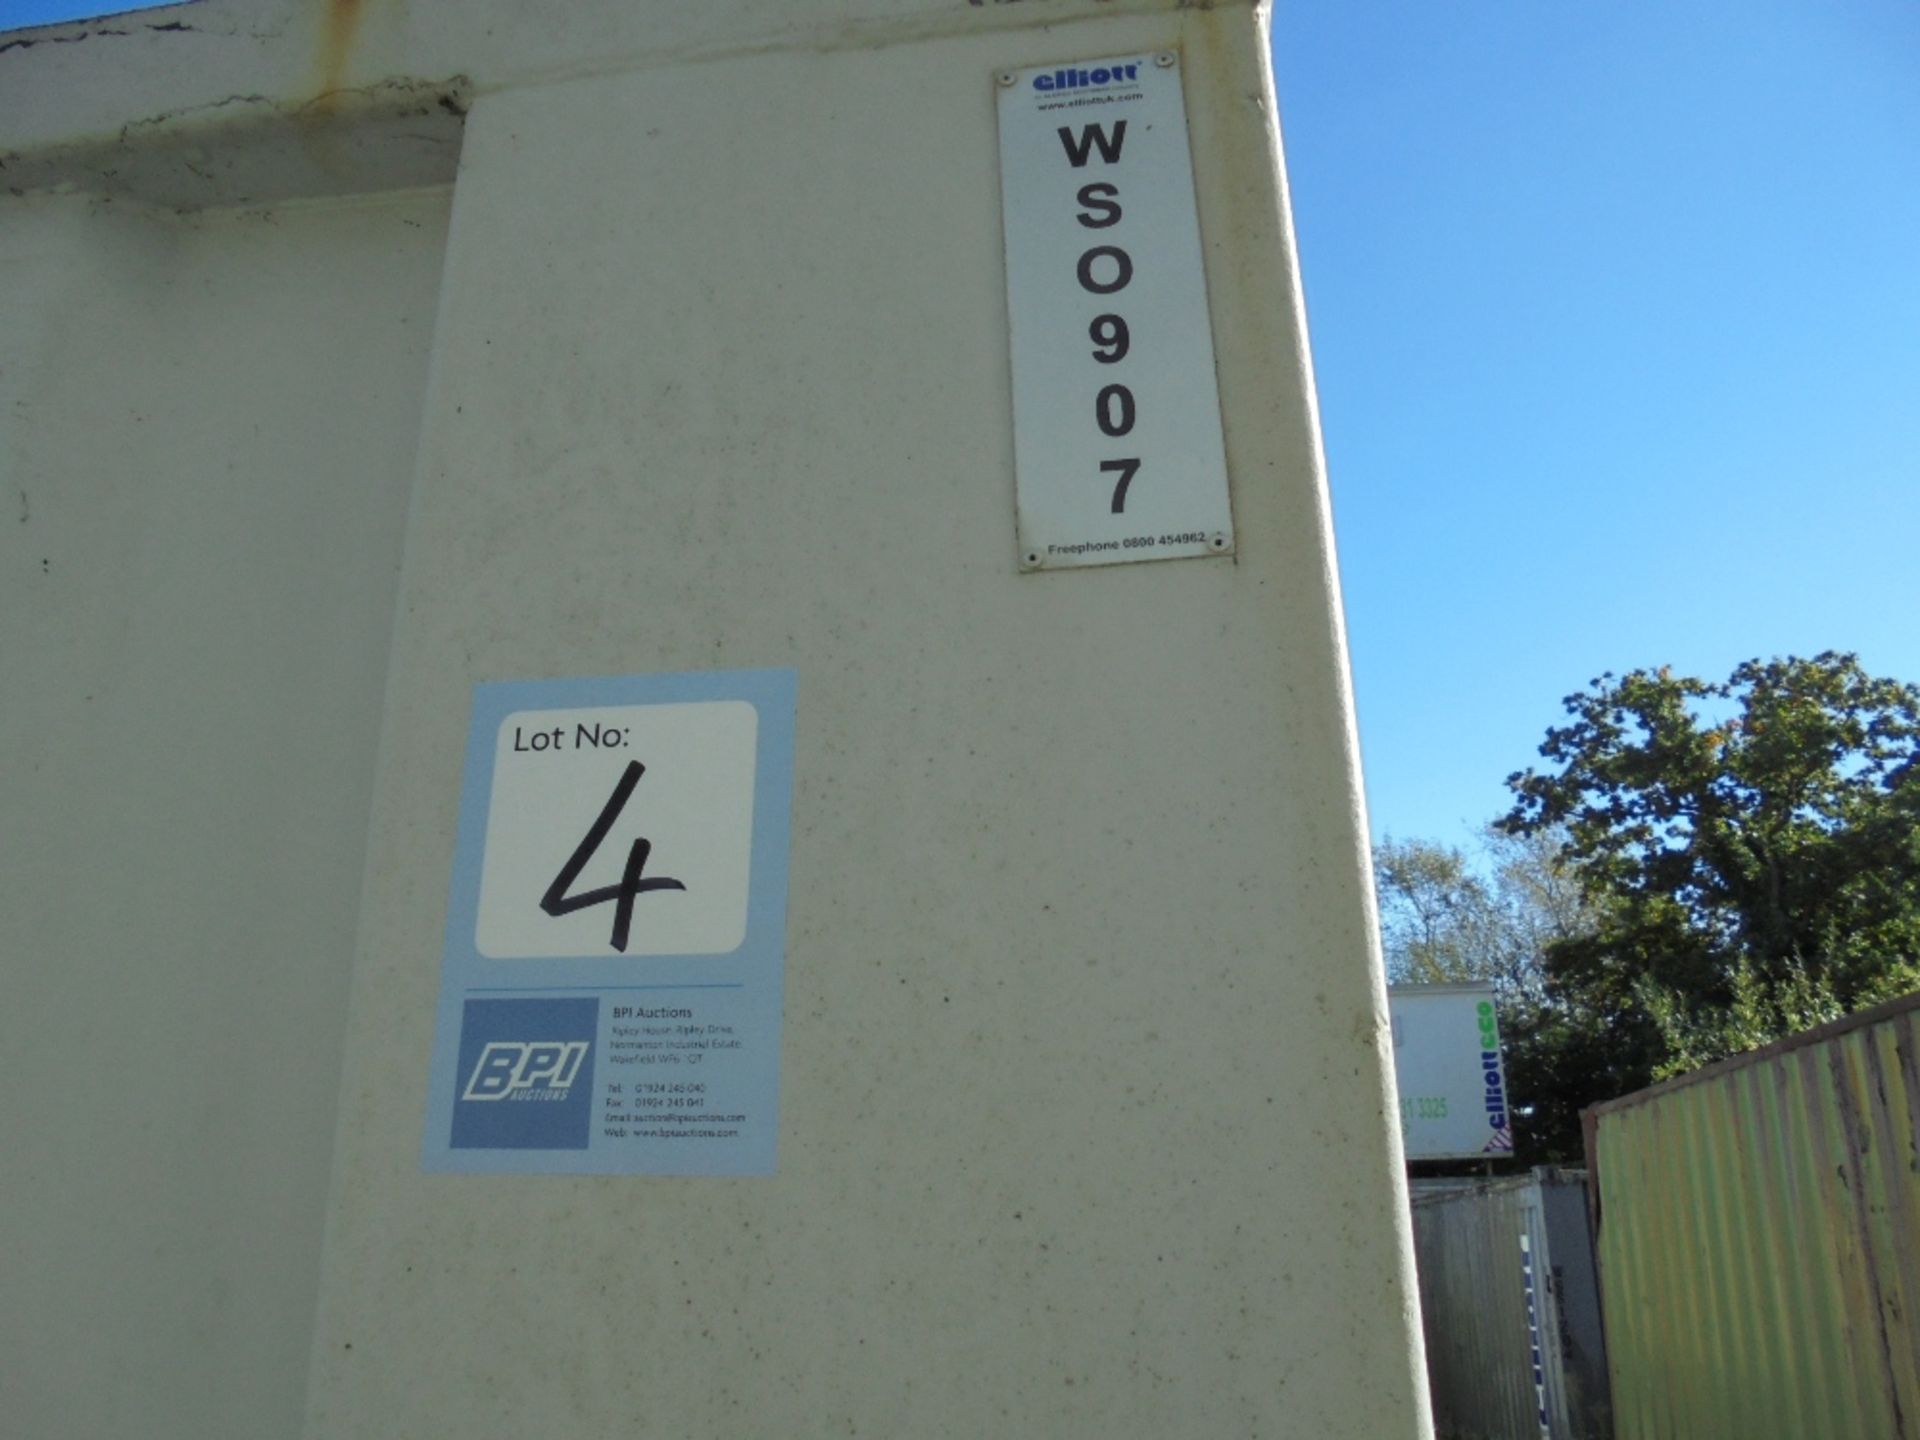 WSO907 32ft x 9ft Anti Vandal Office - Image 5 of 5